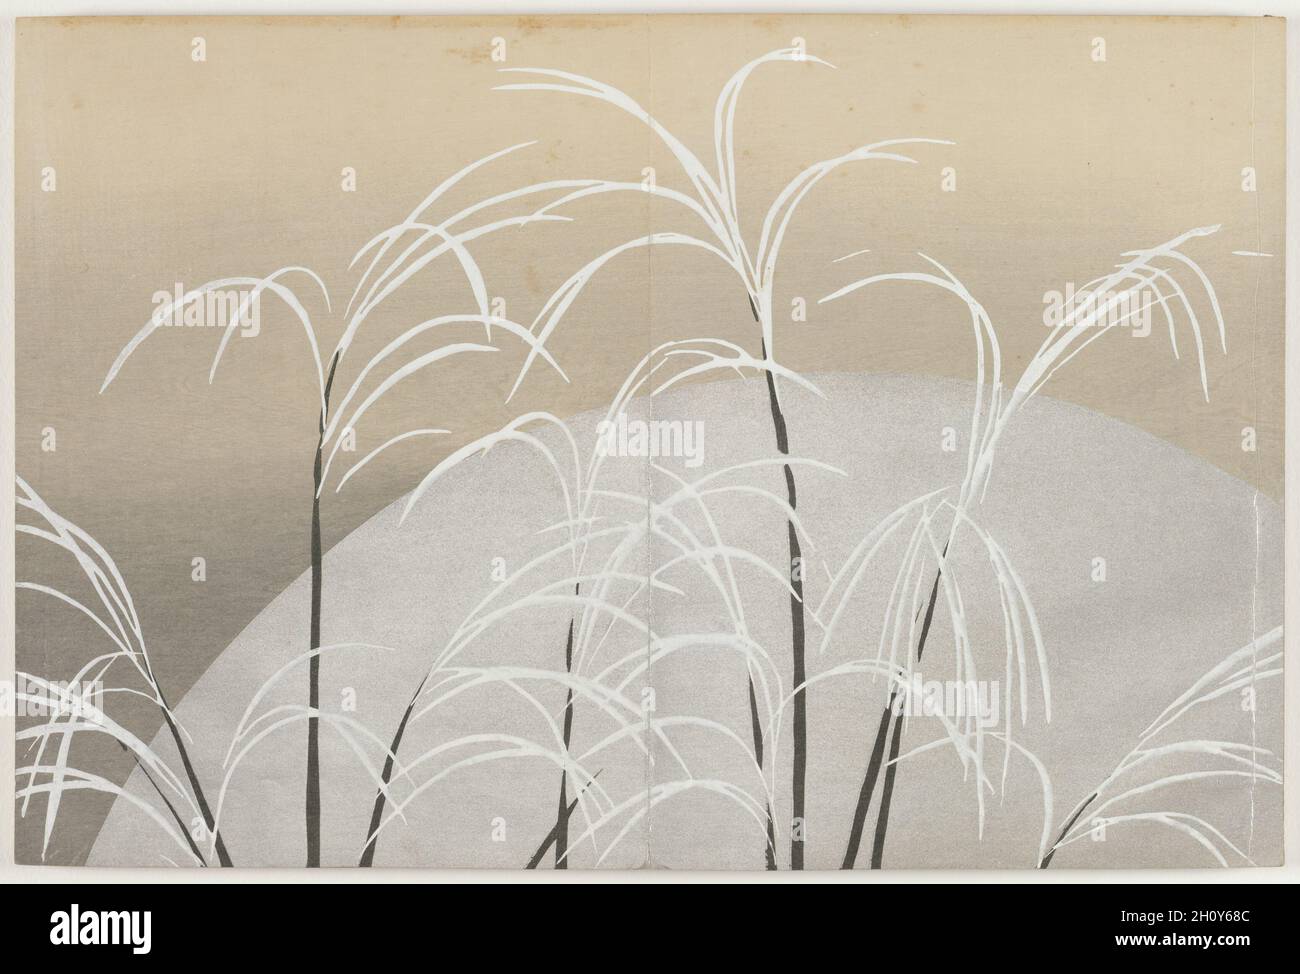 Flowers of a Hundred Worlds (Momoyogusa): Susuki Grass in Moonlight (Obana ni tsuki), 1909-10. Kamisaka Sekka (Japanese, 1866-1942). Color woodcuts with gold and silver; sheet: 29.9 x 22.1 cm (11 3/4 x 8 11/16 in.).  This print from a set of three woodblock printed albums displays the graphic design prowess of Kamisaka Sekka. The images were first distributed one by one to subscribers to the series but later were reissued in bound form, like this book, for mass consumers. Each print features a vignette taken from nature or Japanese literature. Many of the scenes have a long history in Japan, o Stock Photo